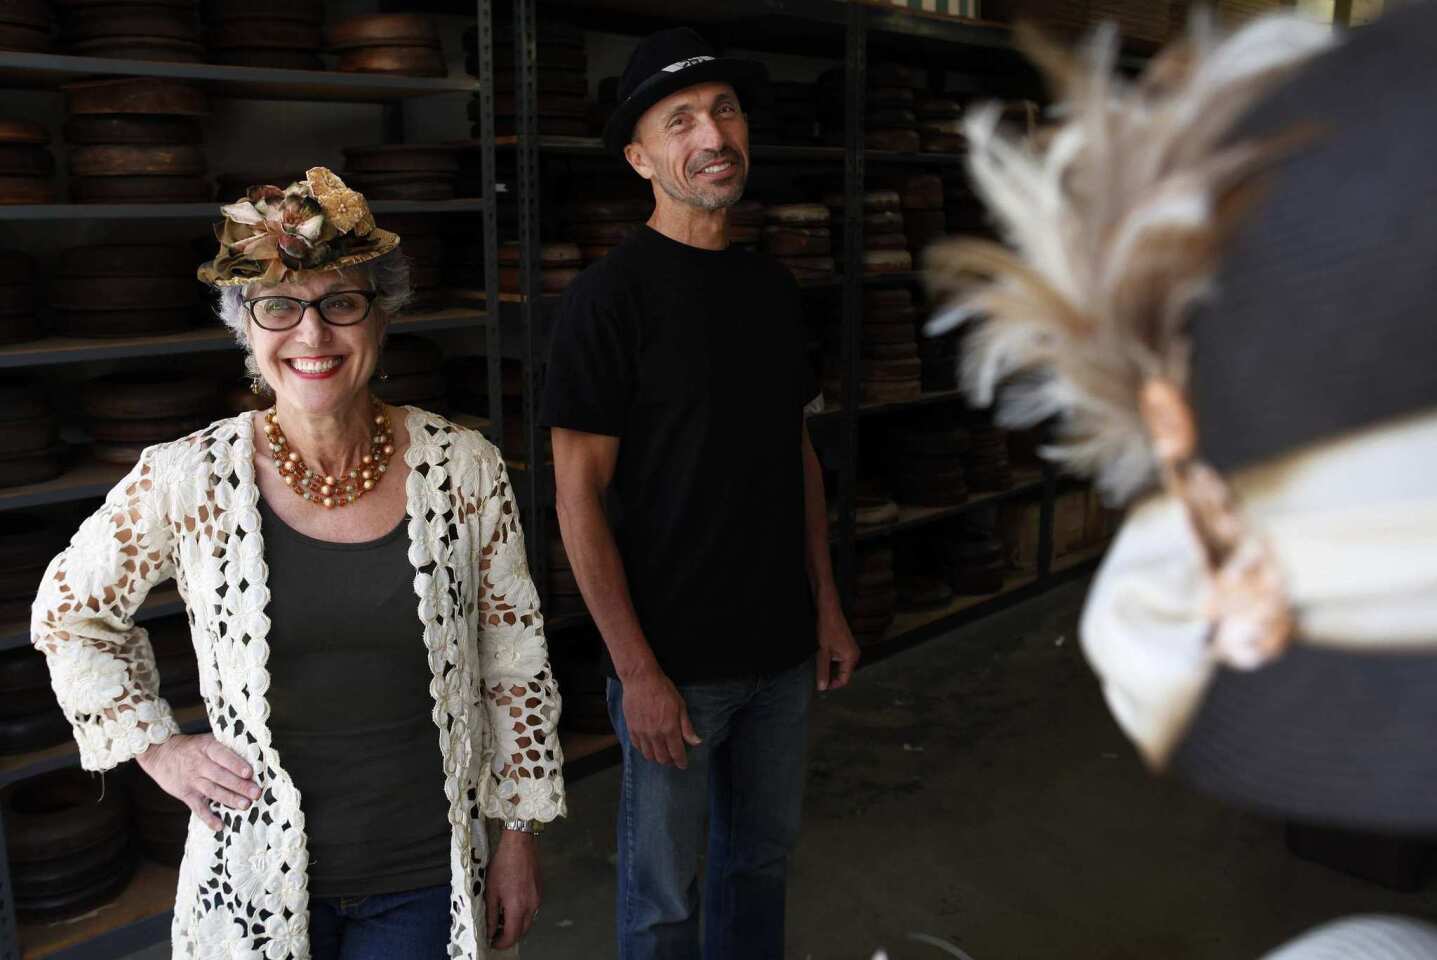 Louise, left, and Lawrence Green of Louise Green Millinery in the factory of their millinery. Green makes romantic and beautiful vintage-inspired creations that have crowned stylish women, music and movie stars since 1987.